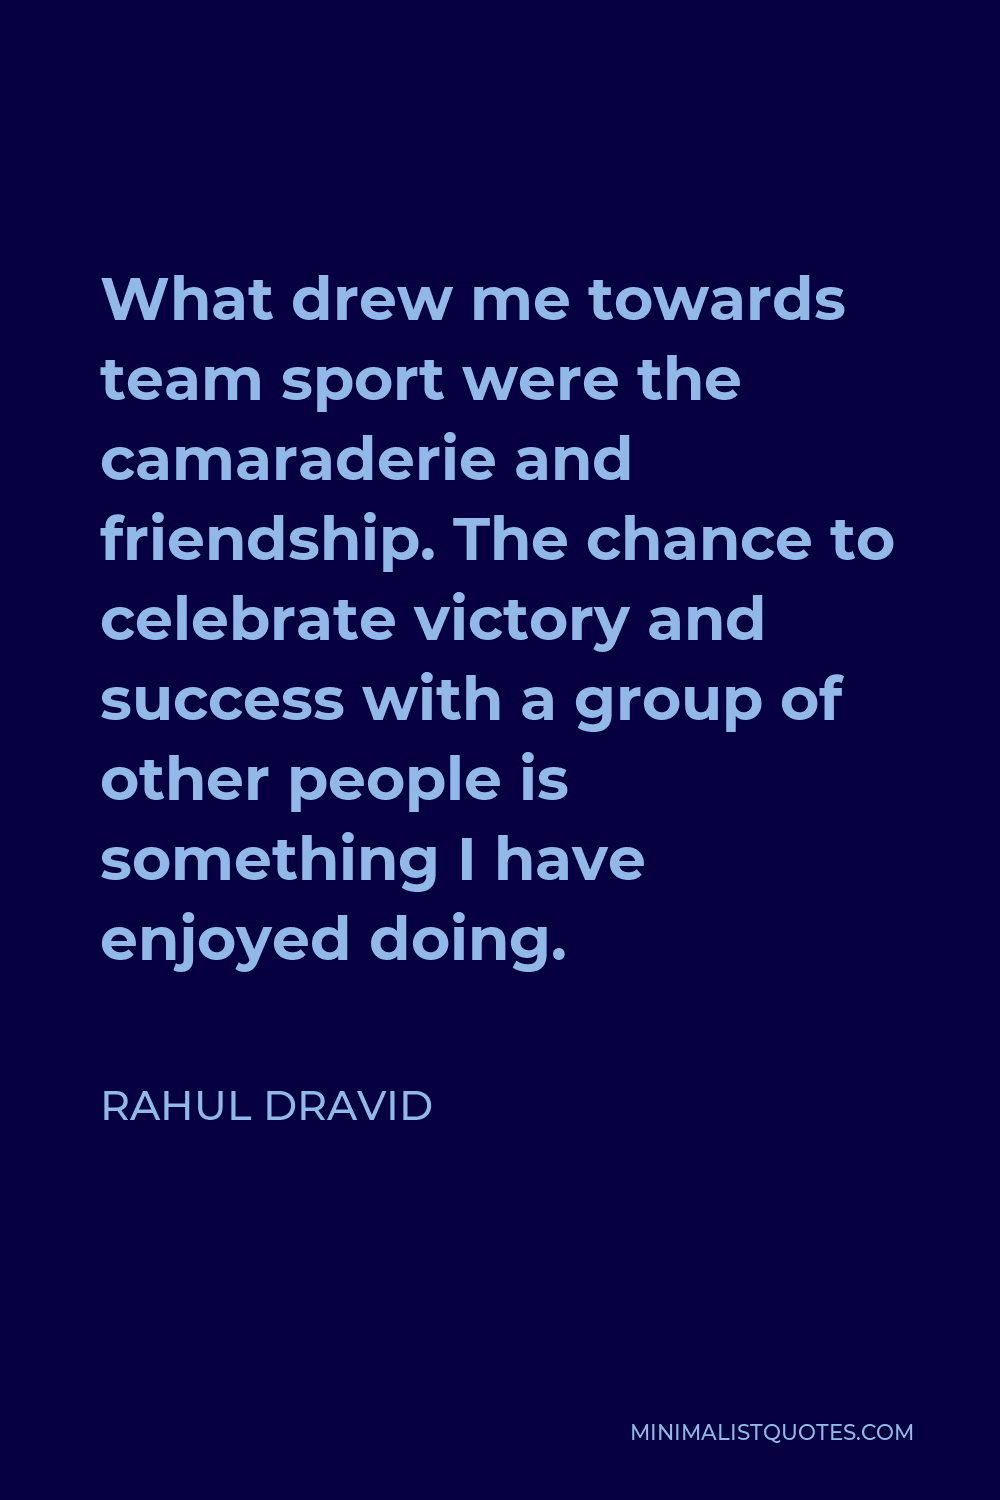 Rahul Dravid Quote - What drew me towards team sport were the camaraderie and friendship. The chance to celebrate victory and success with a group of other people is something I have enjoyed doing.